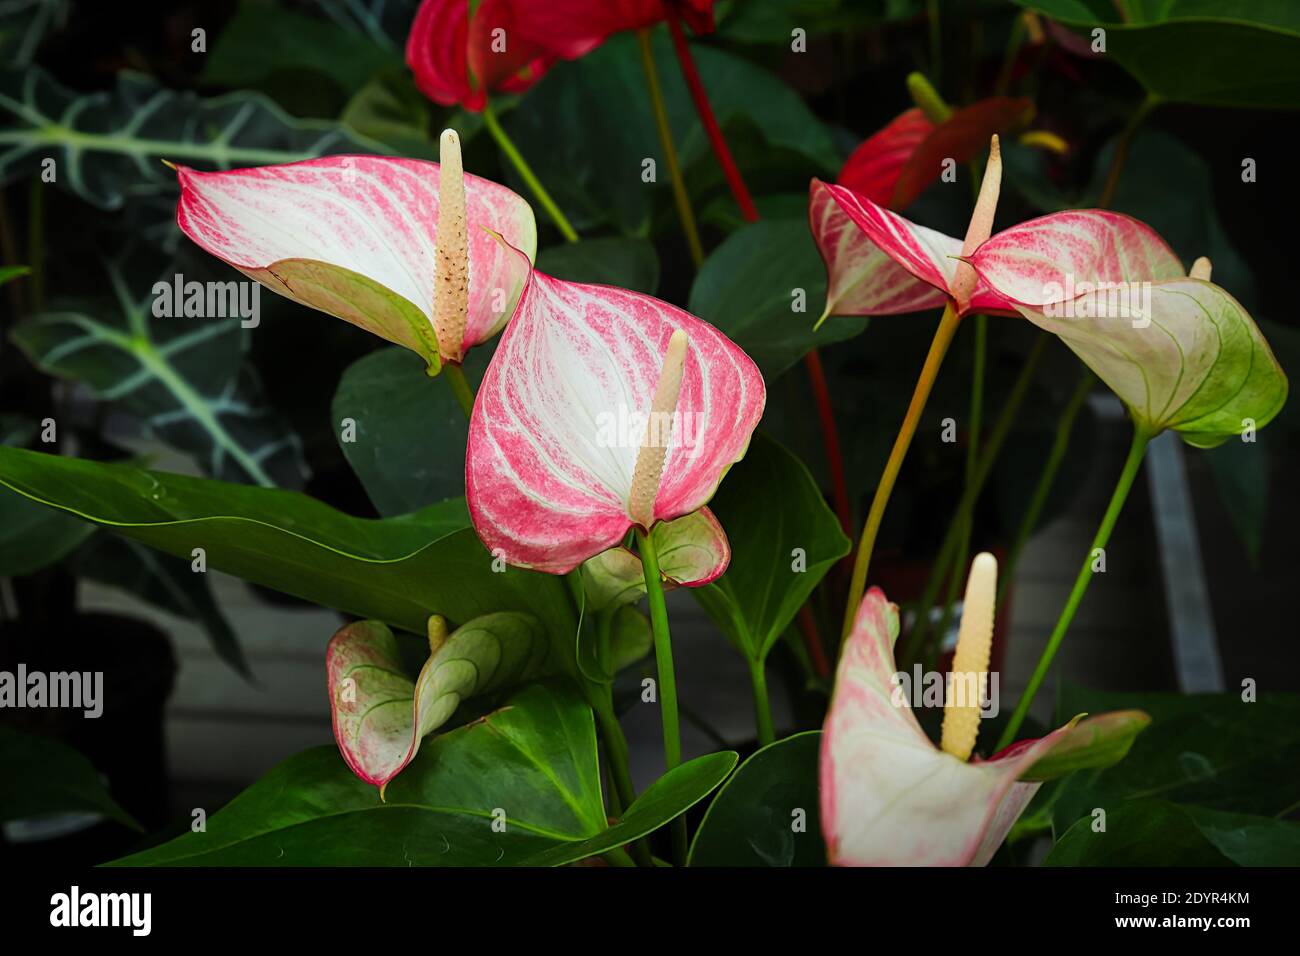 Delicate leaves on a healthy anthurium plant. Stock Photo